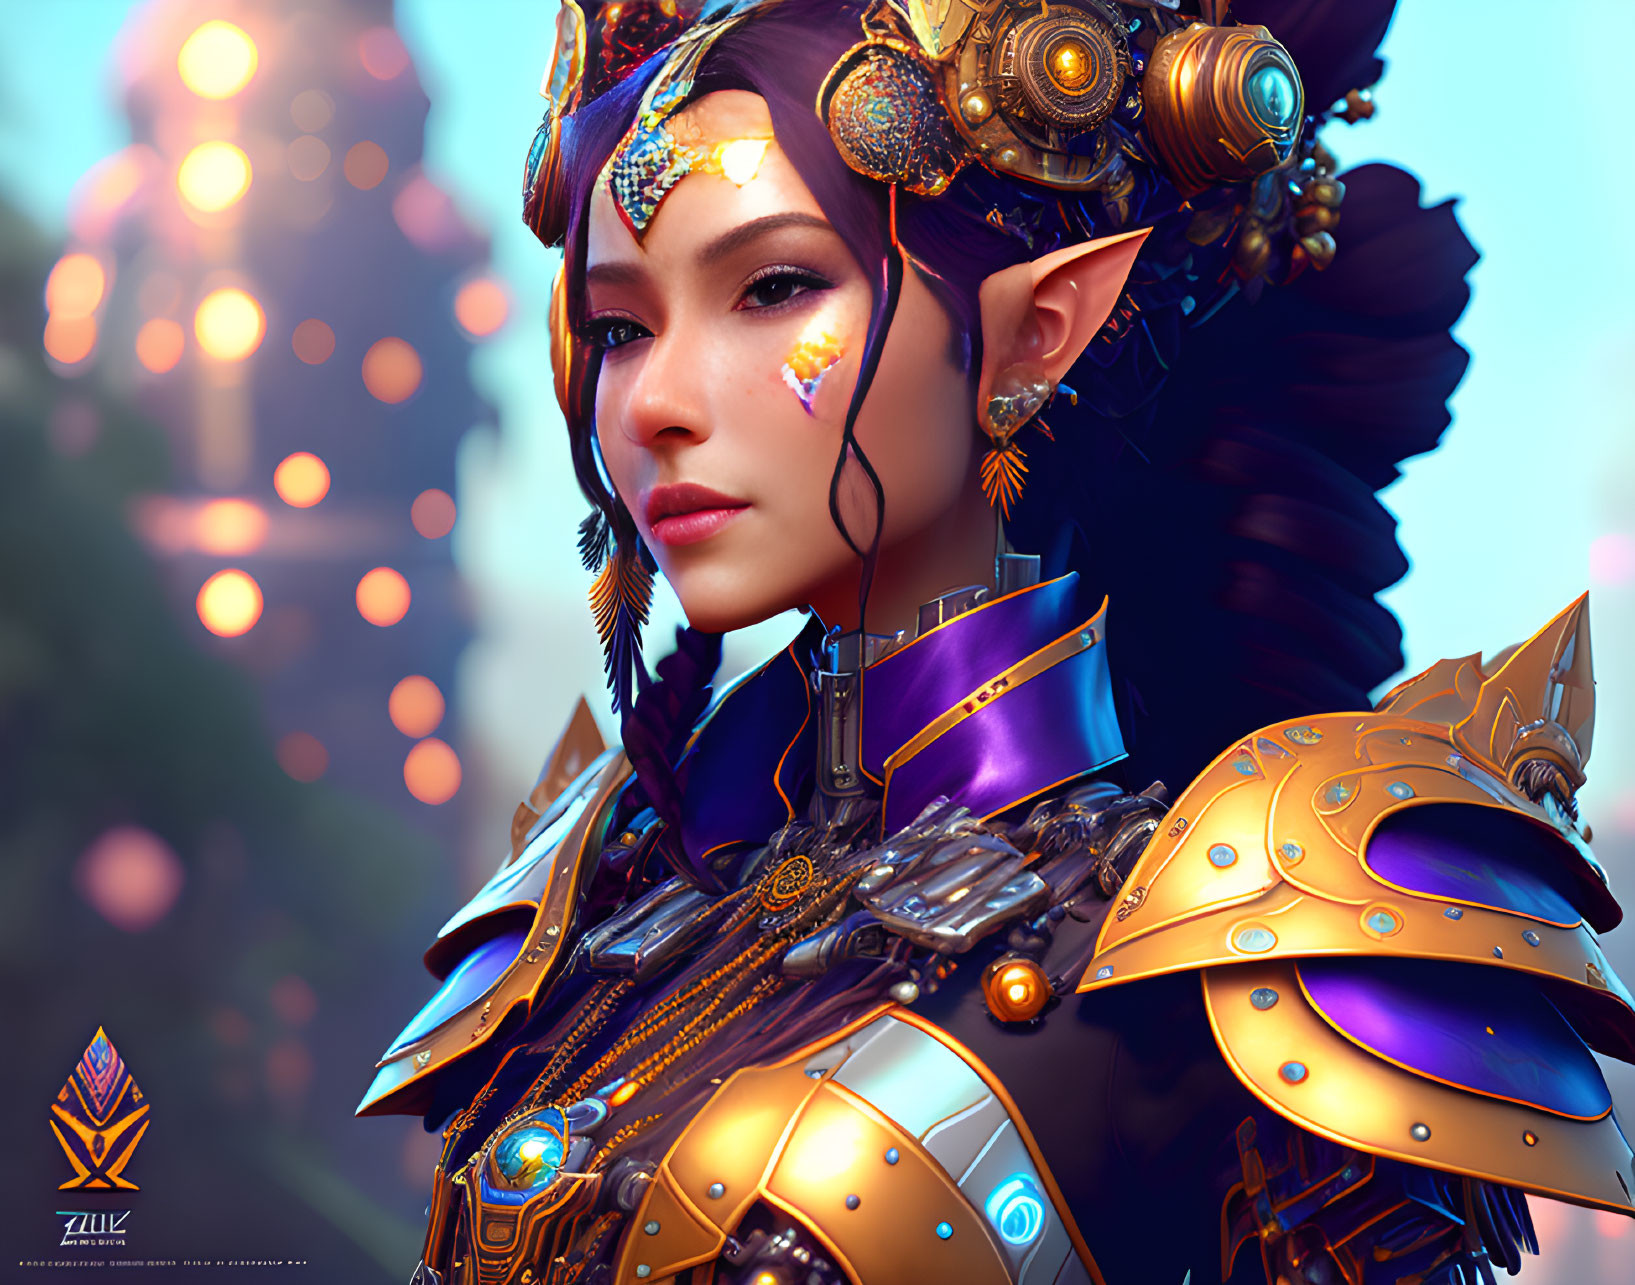 Digital 3D illustration: Female character in golden armor and headdress, with floating lantern background